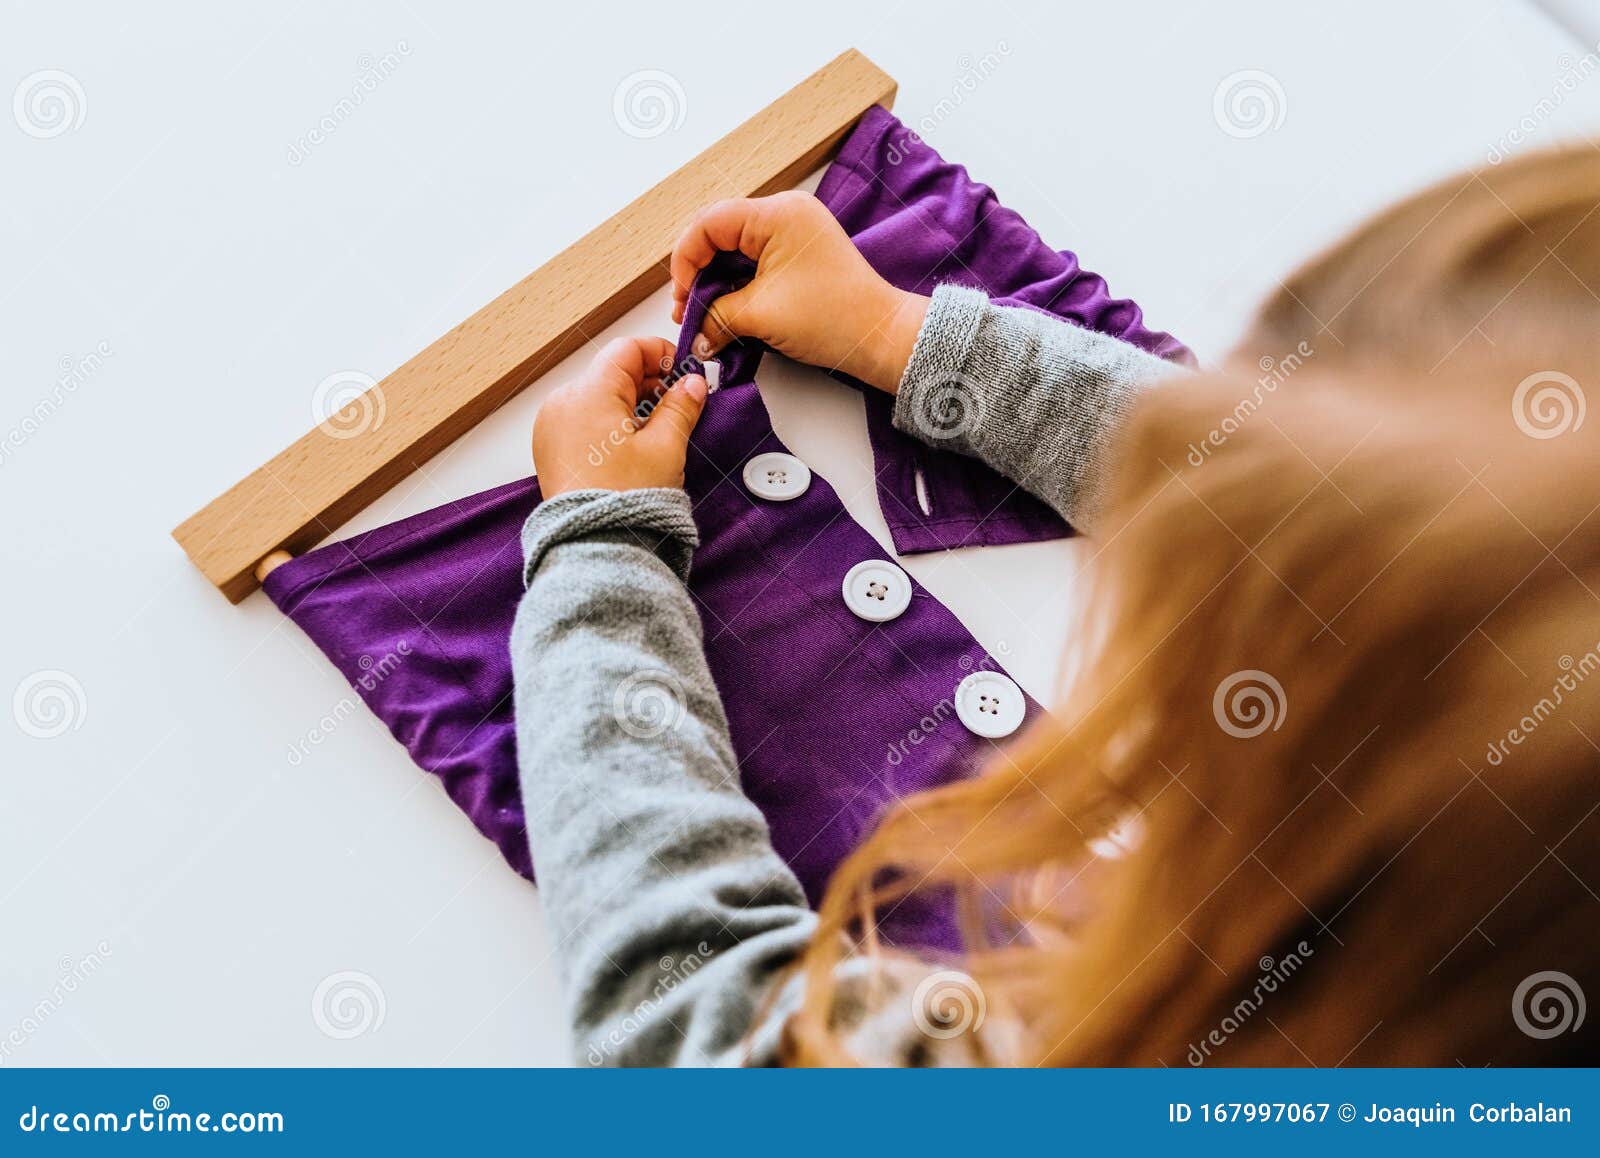 girl buttoning a montessori frame to develop the dexterity of her fingers